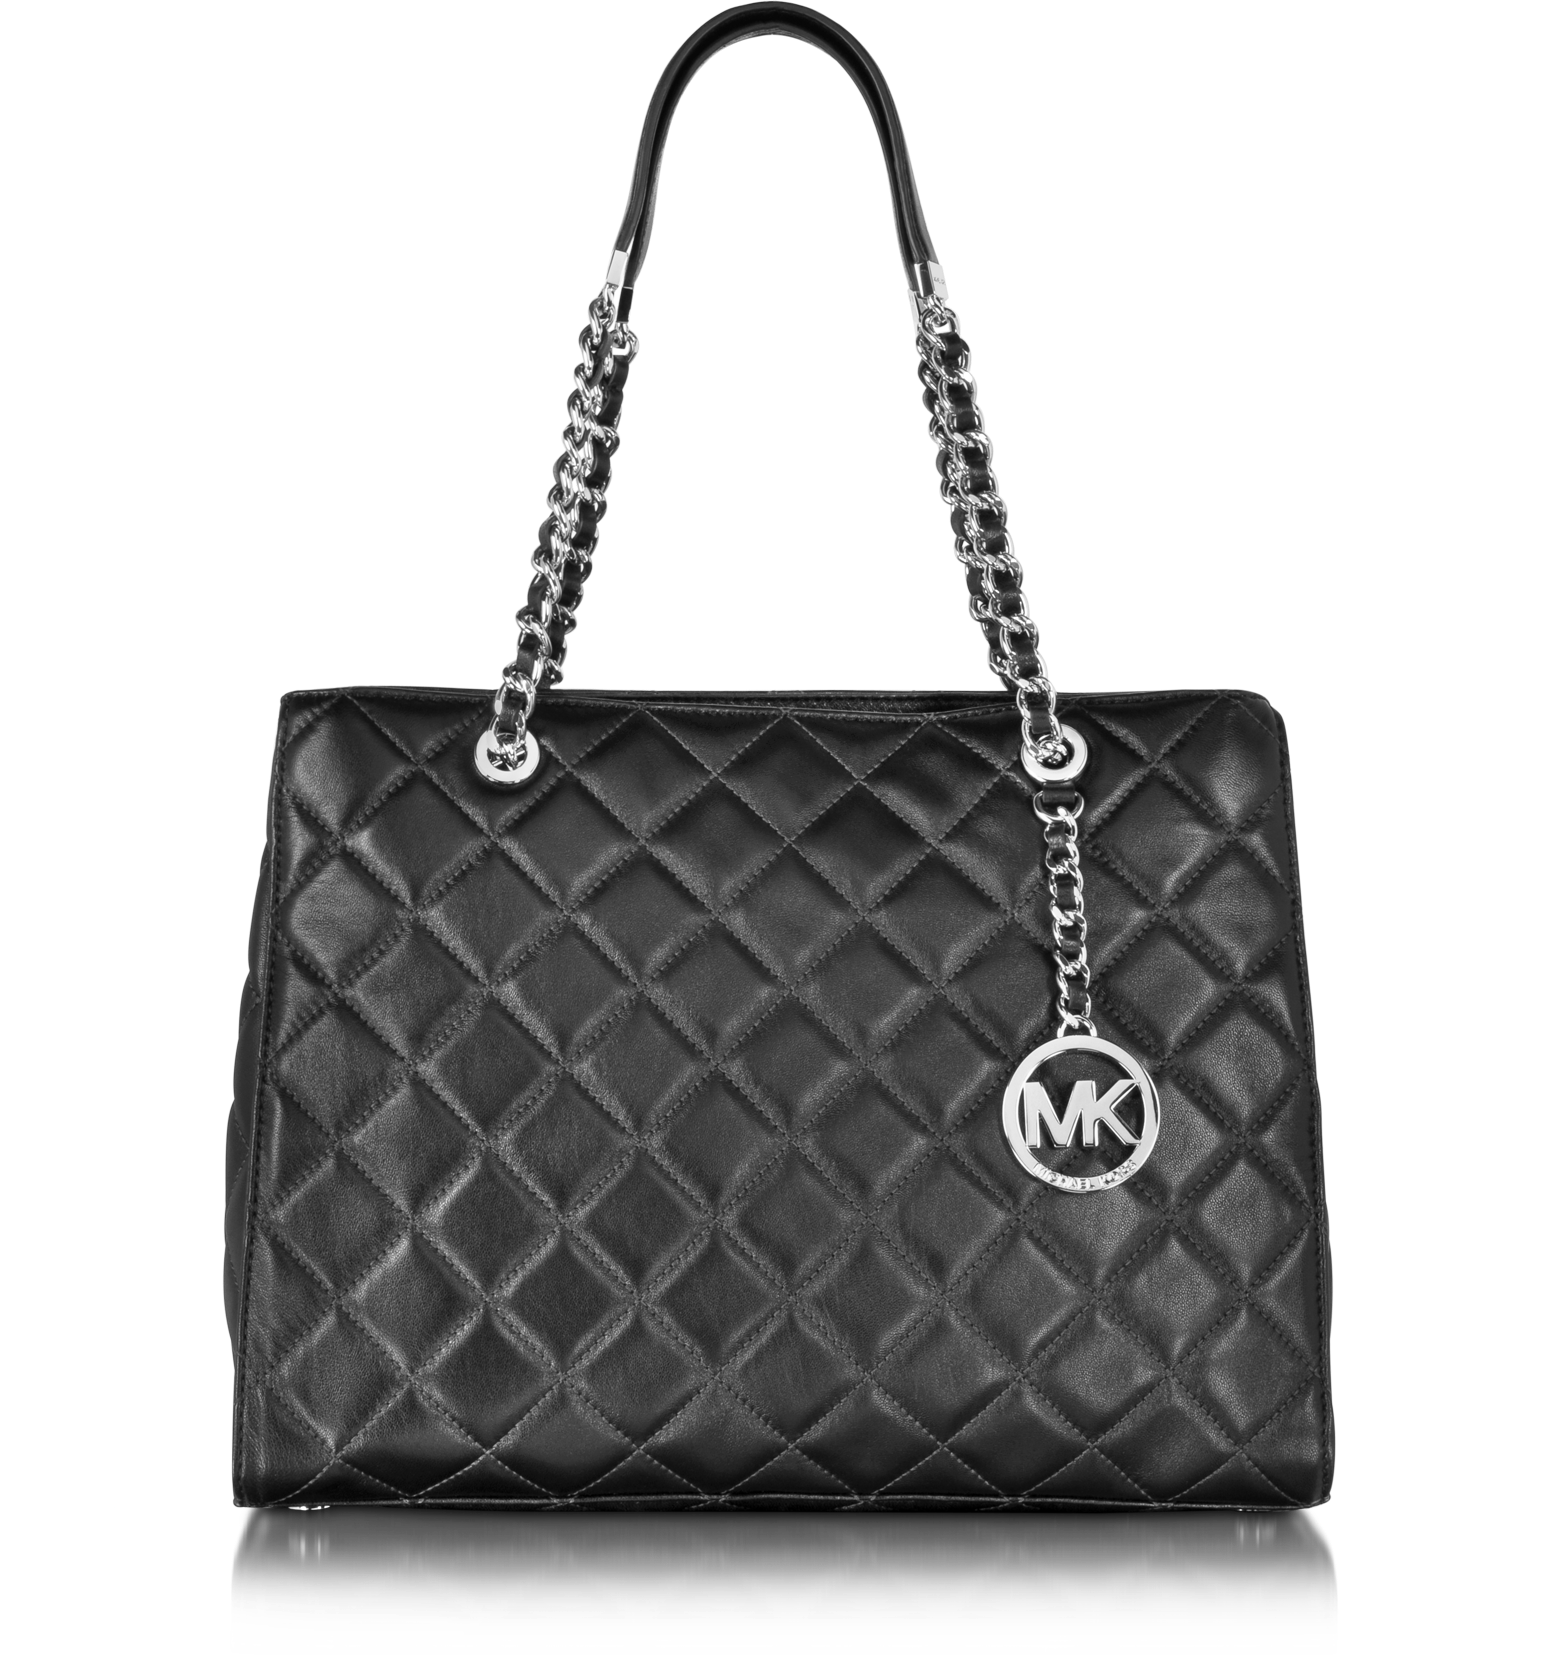 Michael Kors Susannah Large Black Quilted Leather Tote Bag at FORZIERI